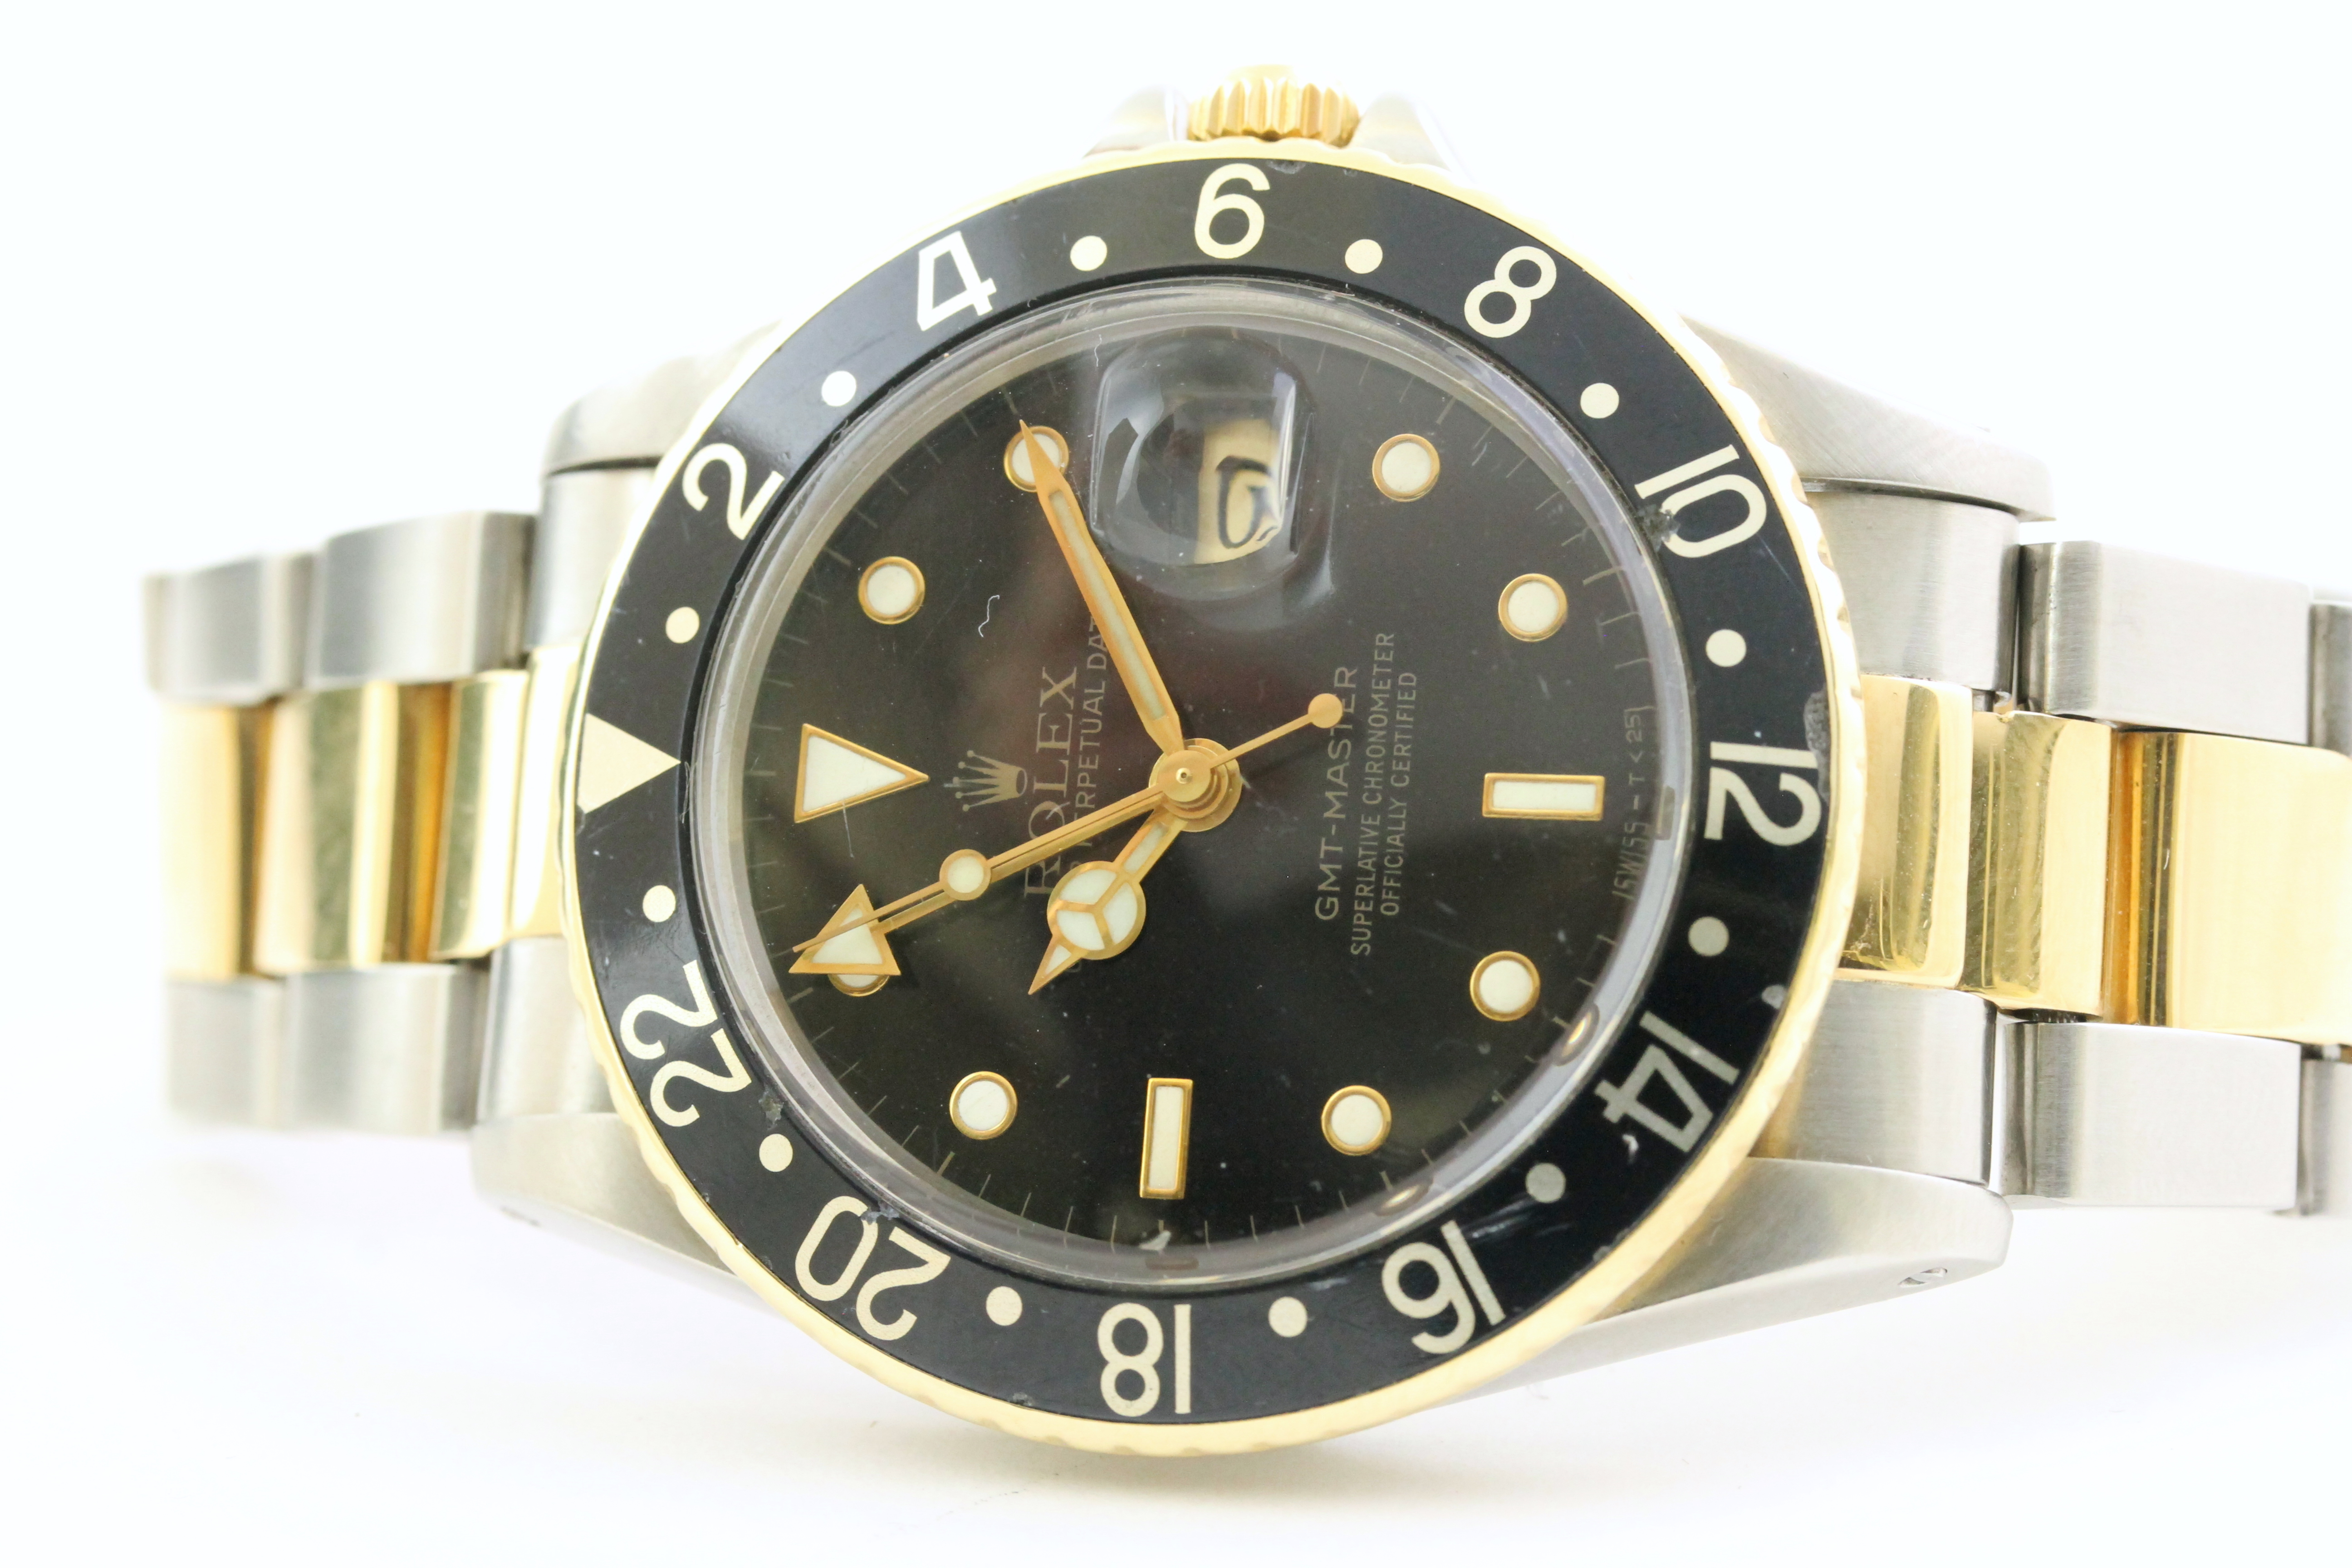 VINTAGE ROLEX GMT MASTER 16753 STEEL AND GOLD CIRCA 1982 - Image 4 of 5